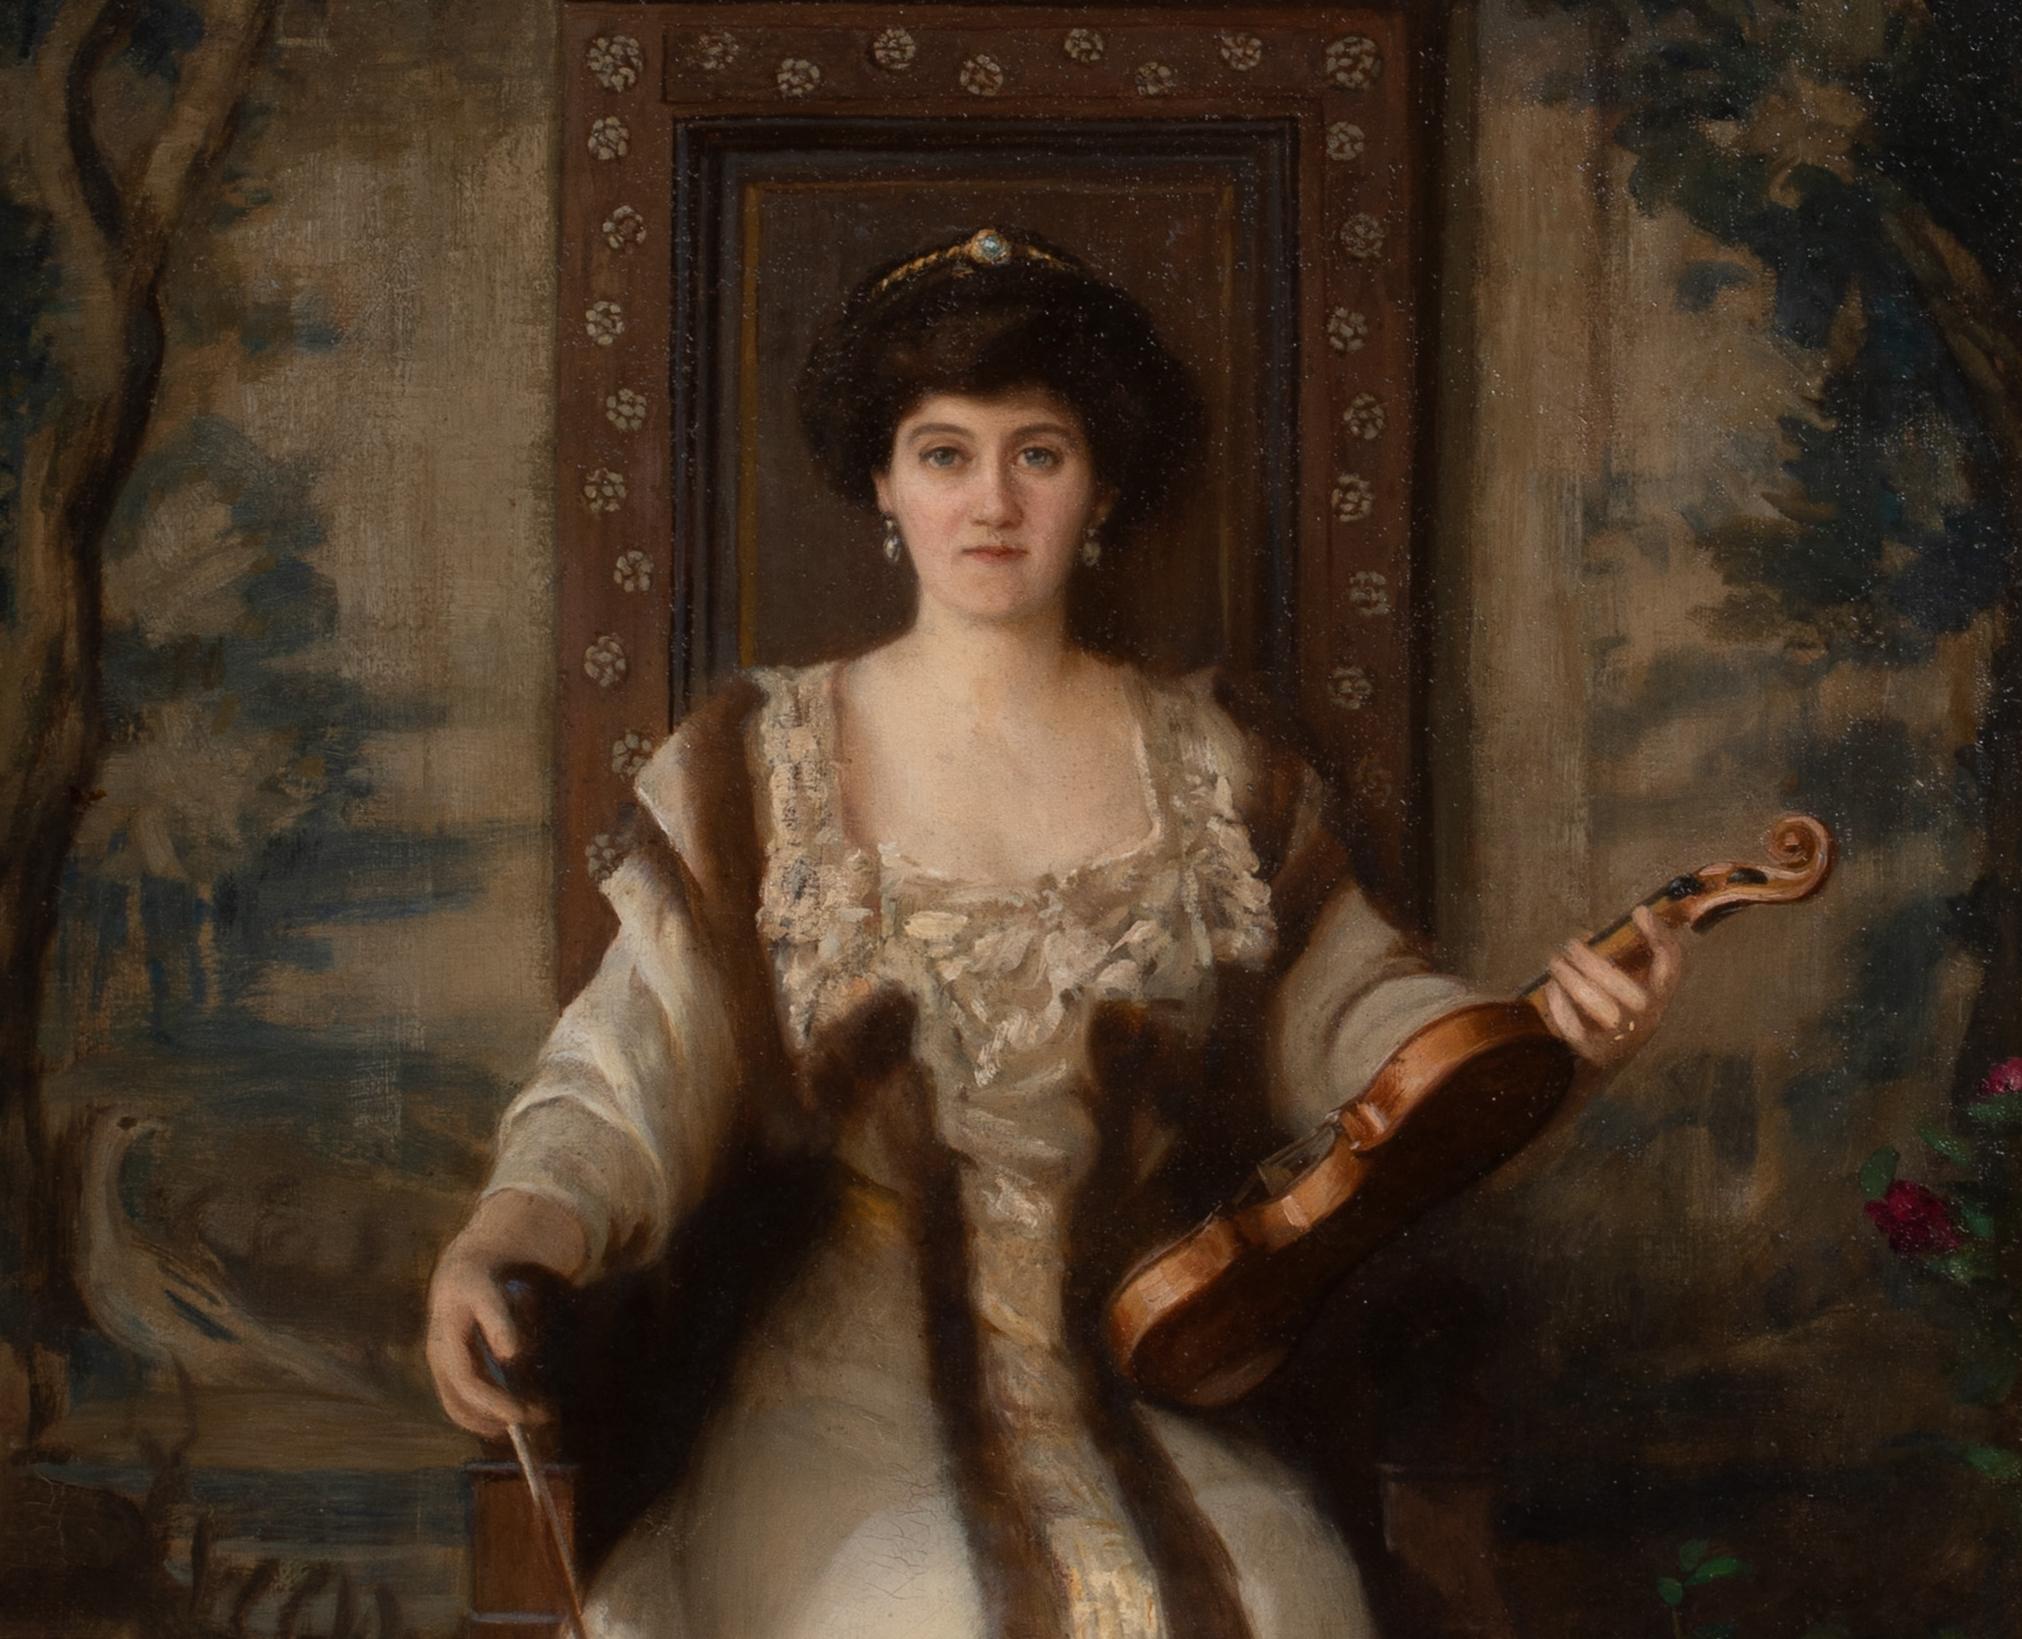 Portrait of Maud Ernestine (Rendel) Gladstone CBE (1865 - 1941), dated 1908 

by Henry John HUDSON (1881-1919) 

20th century portrait of Maud Ernestine (Rendel) Gladstone seated and holding a violin, oil on canvas by Henry John Hudson. Excellent